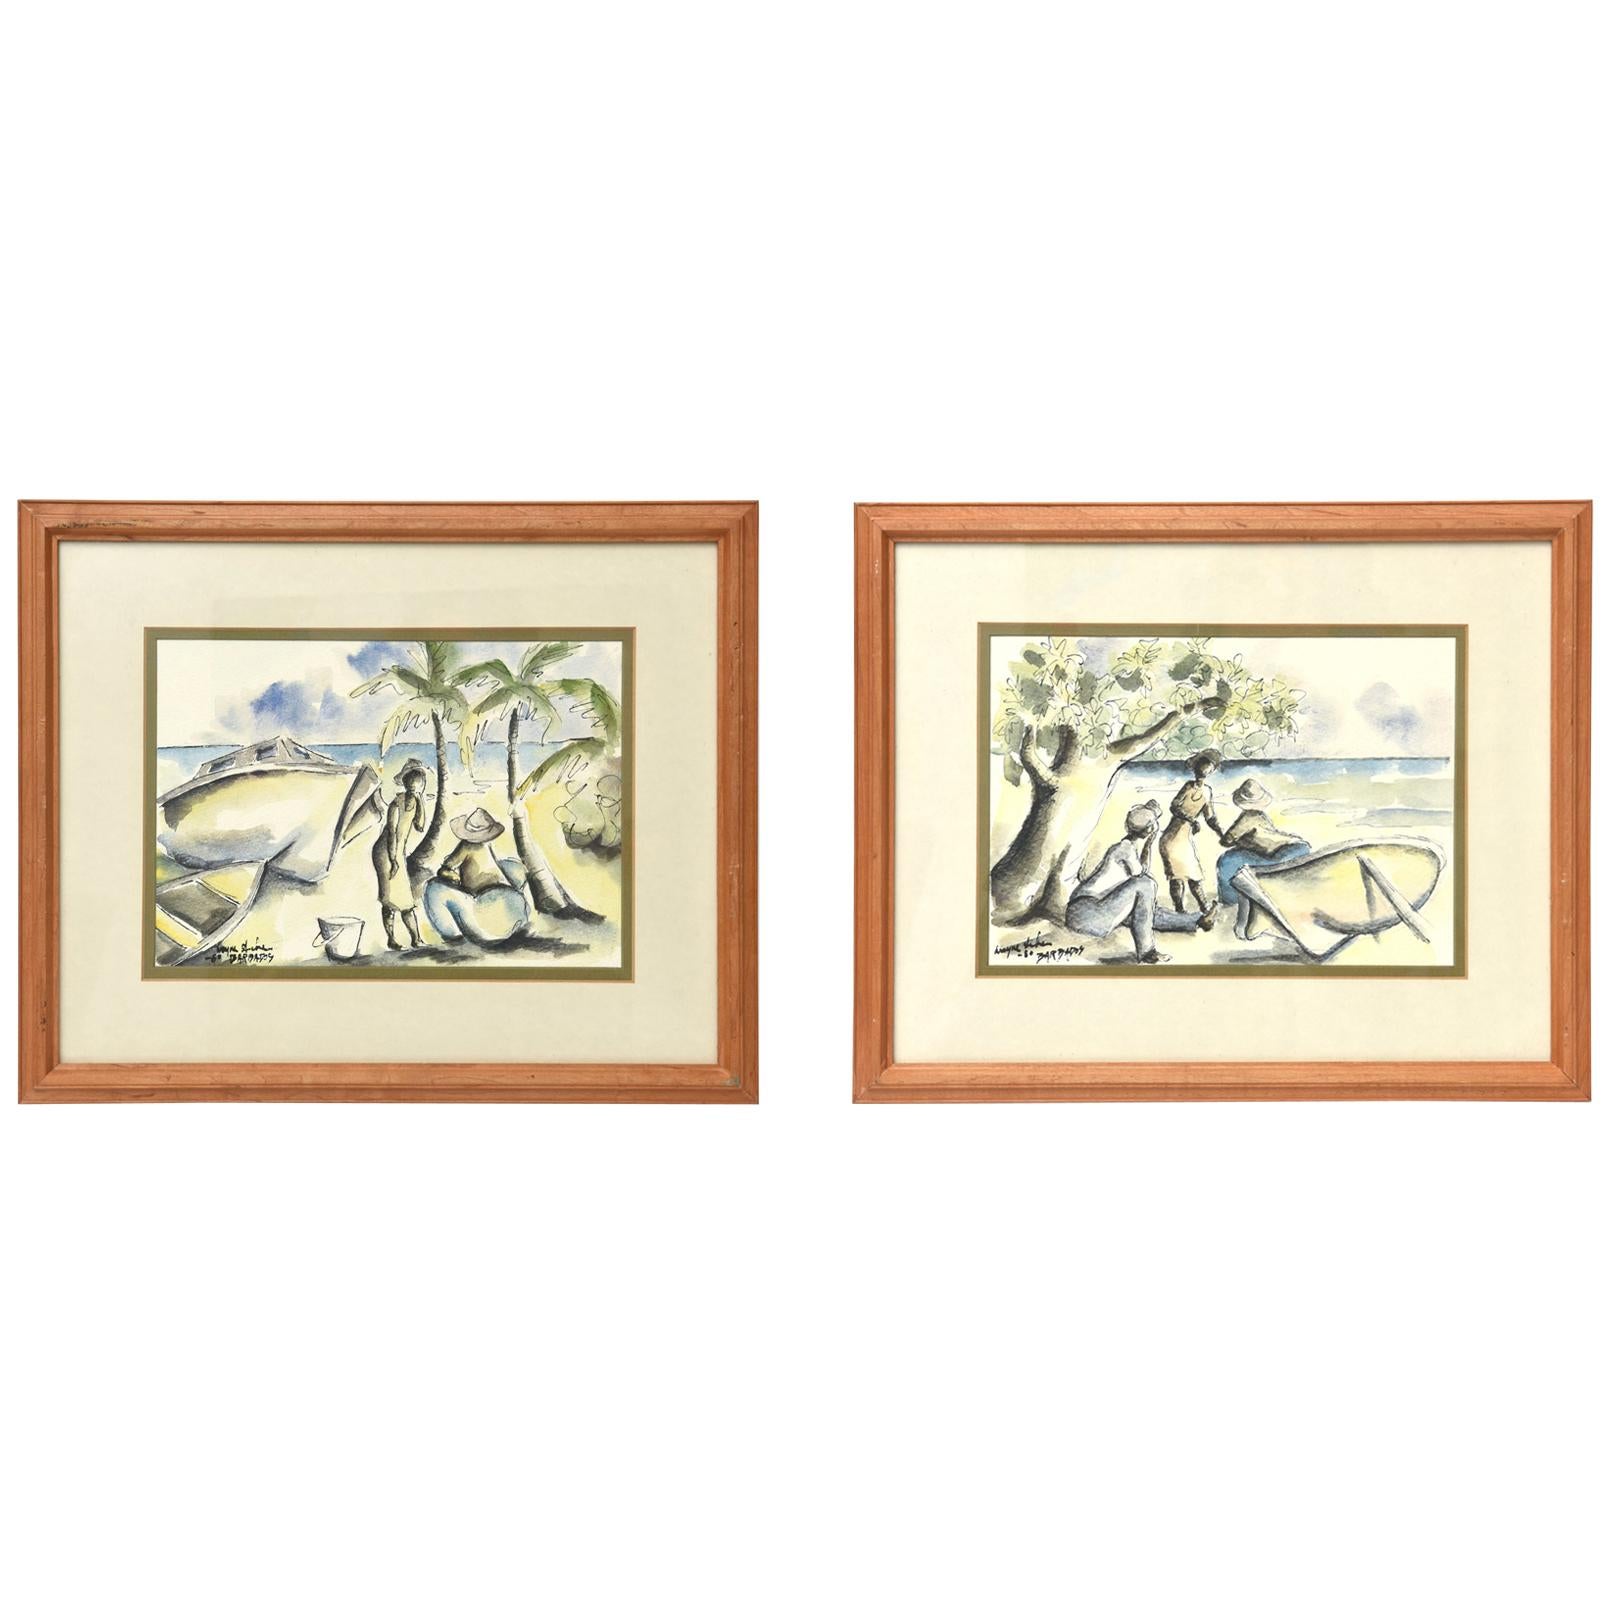 Pair of Watercolor and Ink Seaside Tropical Landscape Drawings Signed